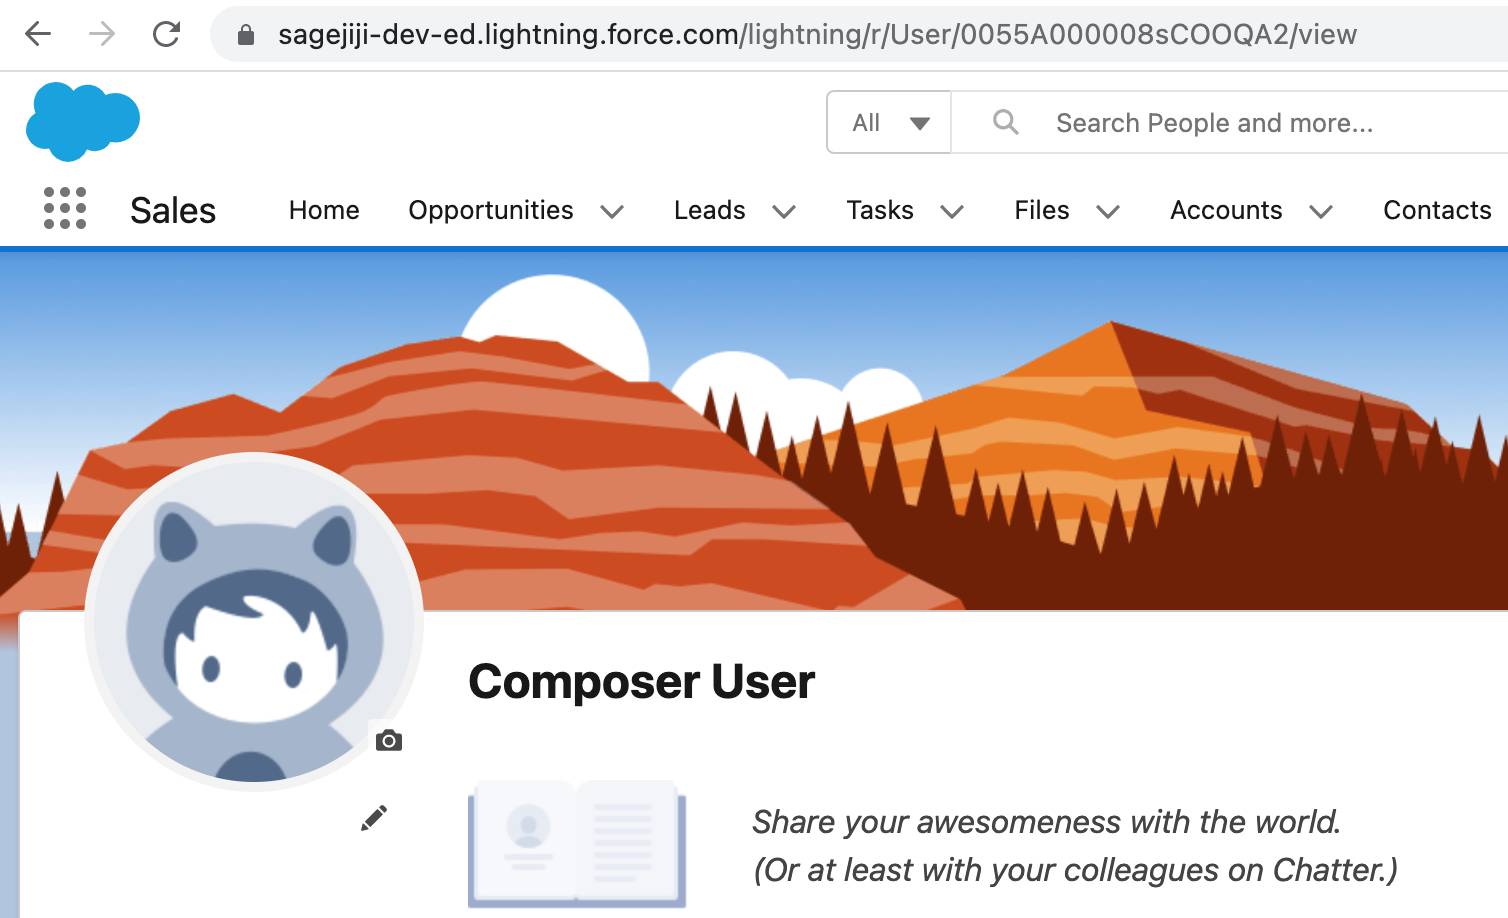 URL of Composer user with Salesforce ID.